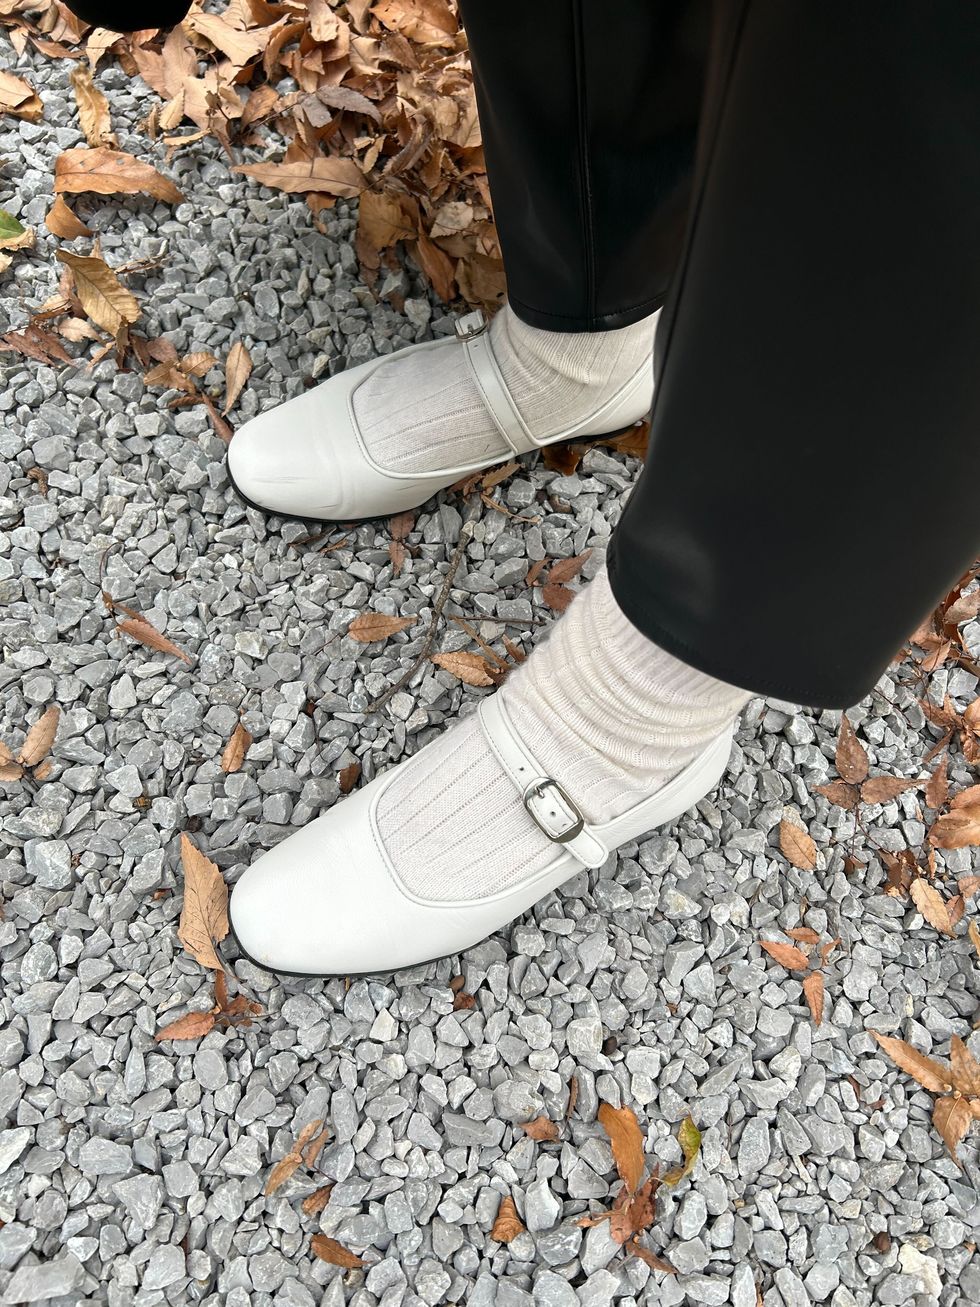 a person's feet in white shoes